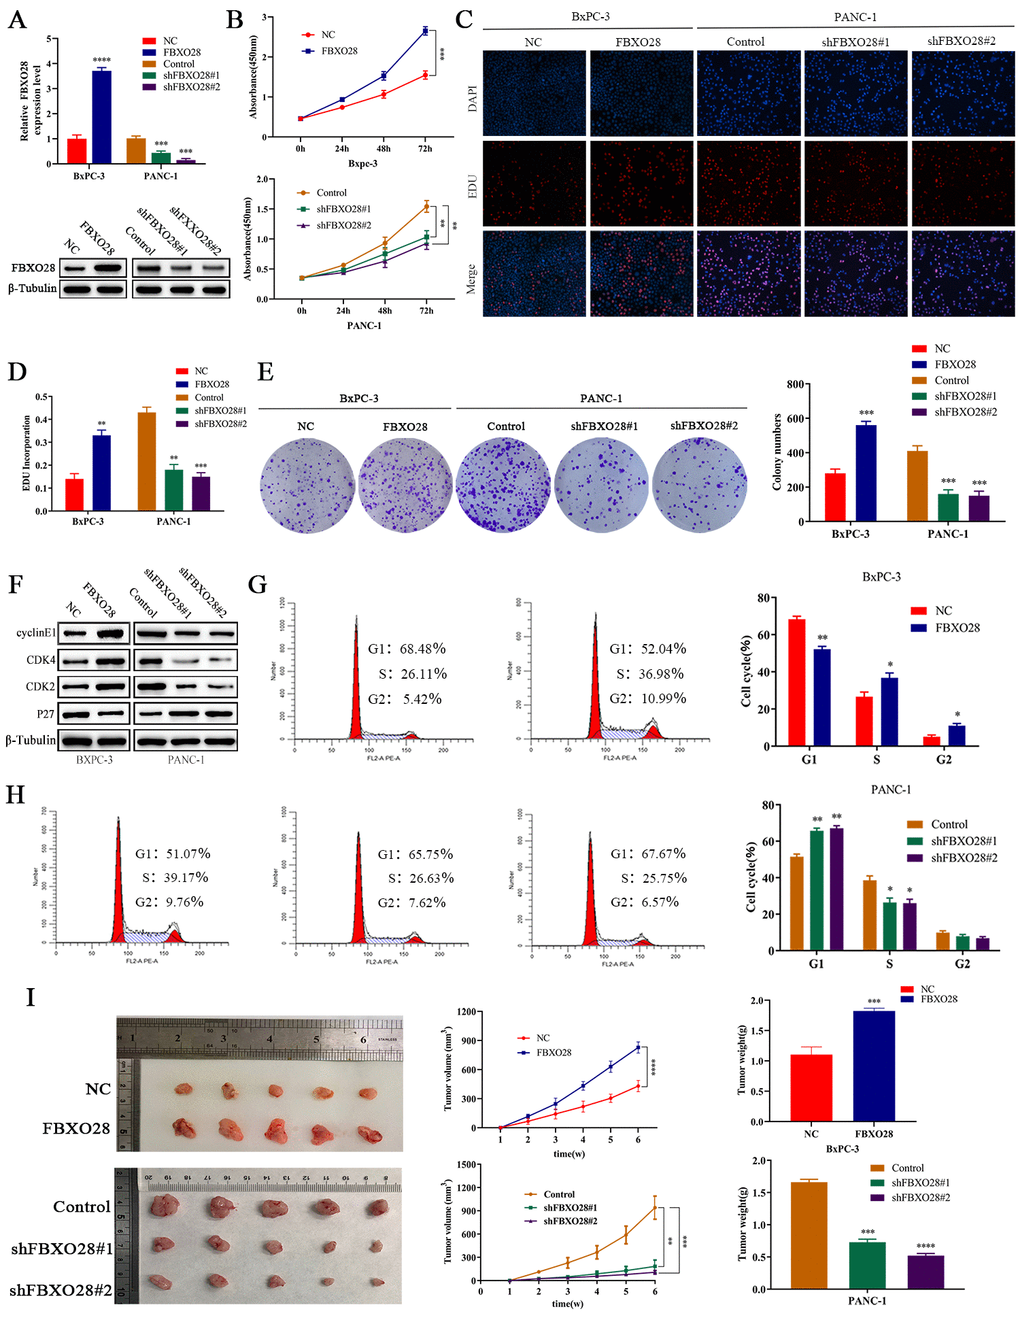 FBXO28 overexpression increases pancreatic cancer cell proliferation. (A) Lentiviral transfection to form stable cells (negative control [NC], FBXO28, Control, shFBXO28#1, shFBXO28#2) and qRT-PCR and western blot to verify transfection effectiveness.  (B–E) Cell Counting Kit-8 (CCK-8), EdU, and clone plate experiments were used to identify the capacity of FBXO28 for cell proliferation and formation in pancreatic cancer cells. (F–H) Western blot and flow cytometry to investigate the effect of FBXO28 on the cell cycle. (I) To construct a xenograft model, mice were injected subcutaneously with cells according to grouping, tumor volume was assessed weekly, the mice were euthanized after 6 weeks, and the tumors were resected and weighed. (J) Immunohistochemical (IHC) of mouse tumor tissues showing the protein expression of Ki67 and proliferating cell nuclear antigen (PCNA) (magnification: ×200, ×400). **P 